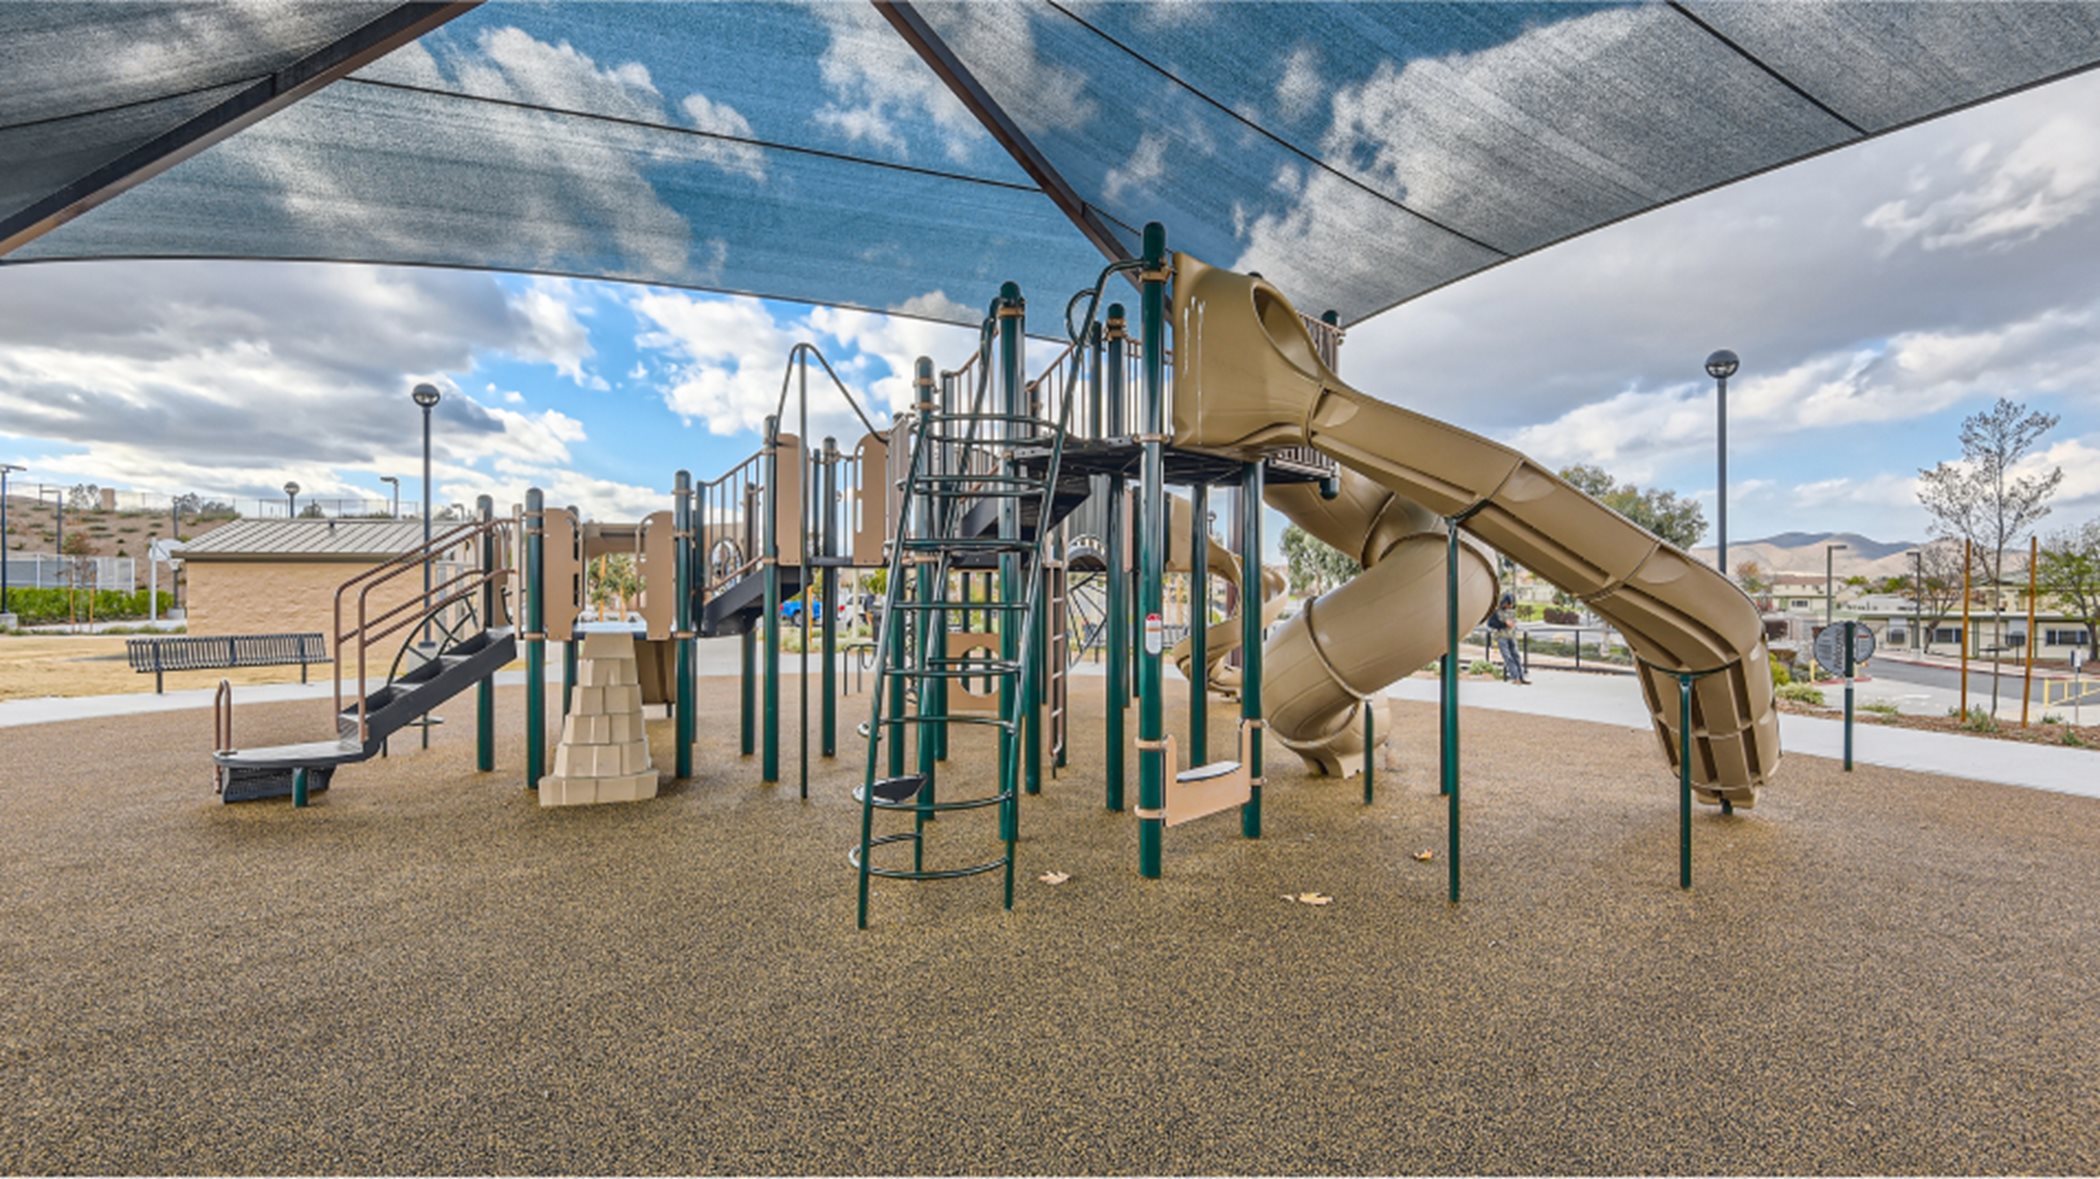 Covered playground area with slide and jungle gym